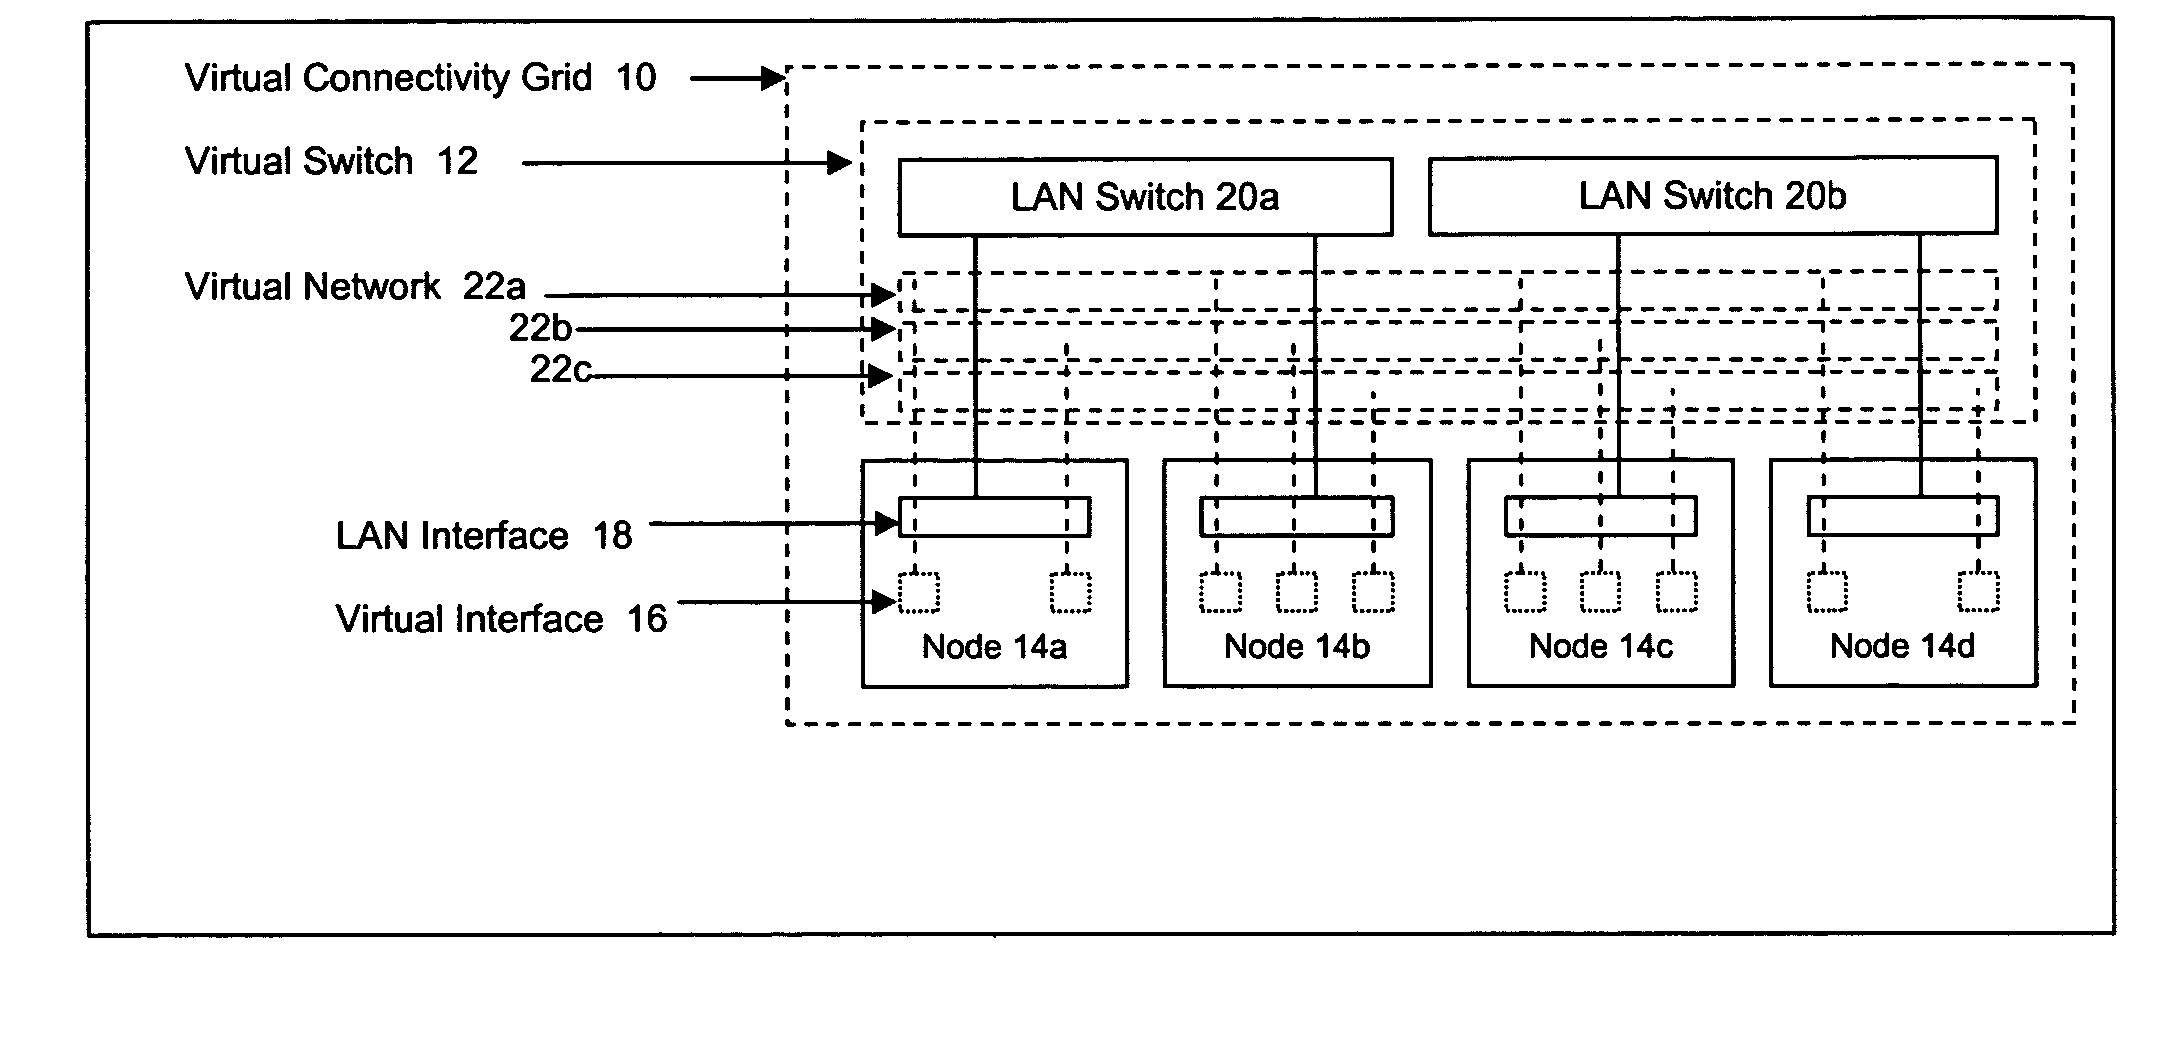 Method and apparatus for achieving dynamic capacity and high availability in multi-stage data networks using adaptive flow-based routing